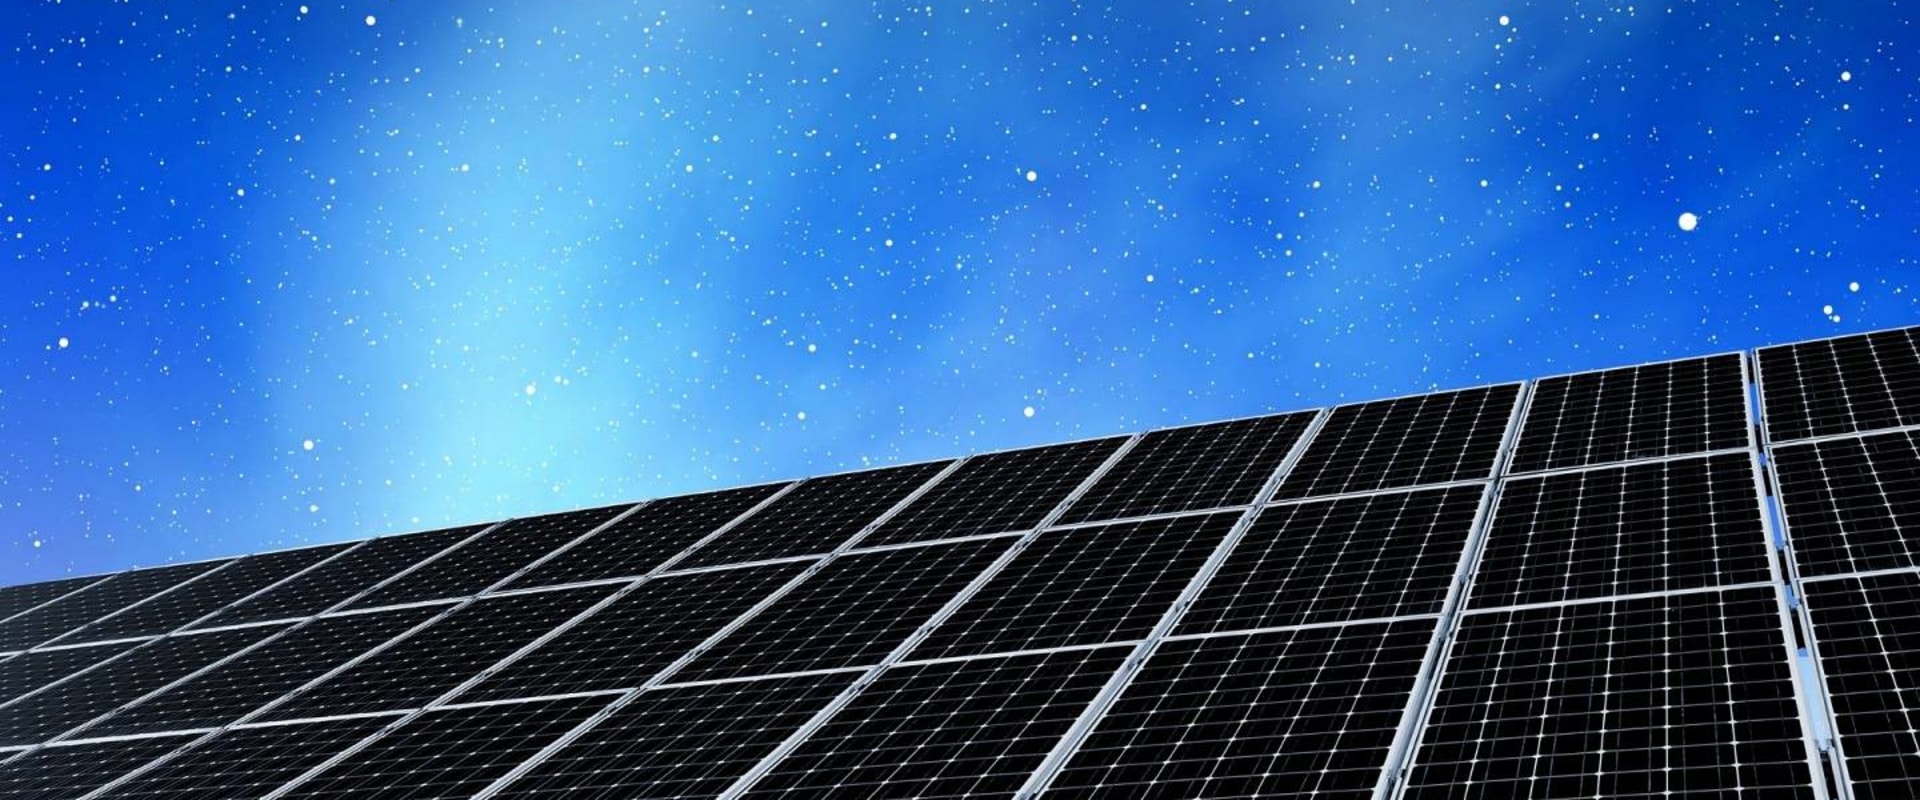 Can Solar Energy Be Used All the Time?